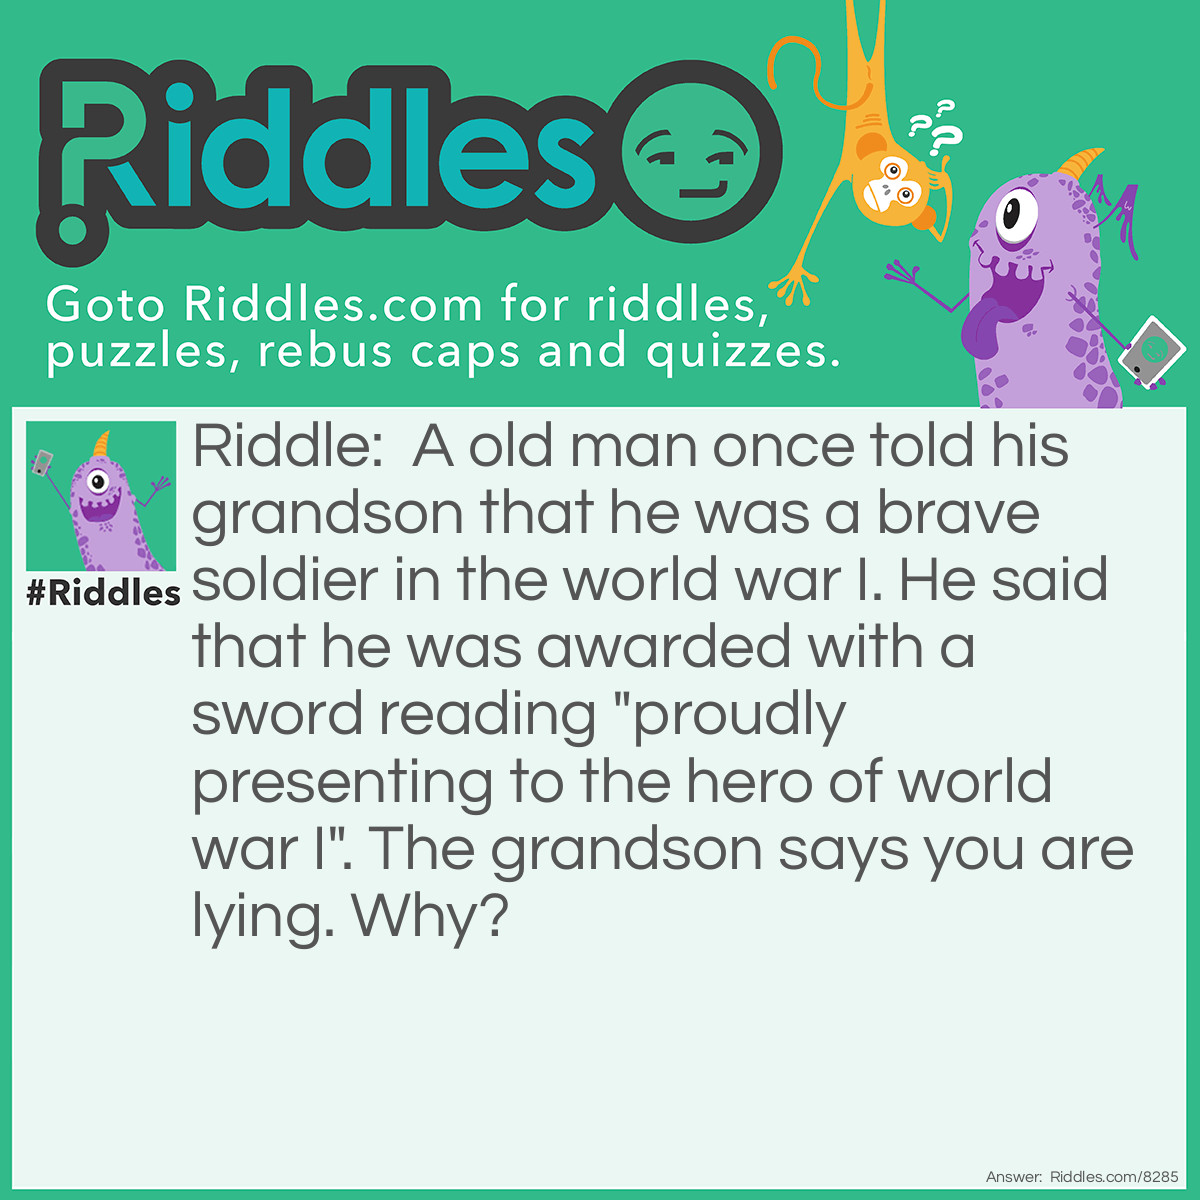 Riddle: A old man once told his grandson that he was a brave soldier in the world war I. He said that he was awarded with a sword reading "proudly presenting to the hero of world war I". The grandson says you are lying. Why? Answer: Because it wouldn't be labelled world war I before world war II began.